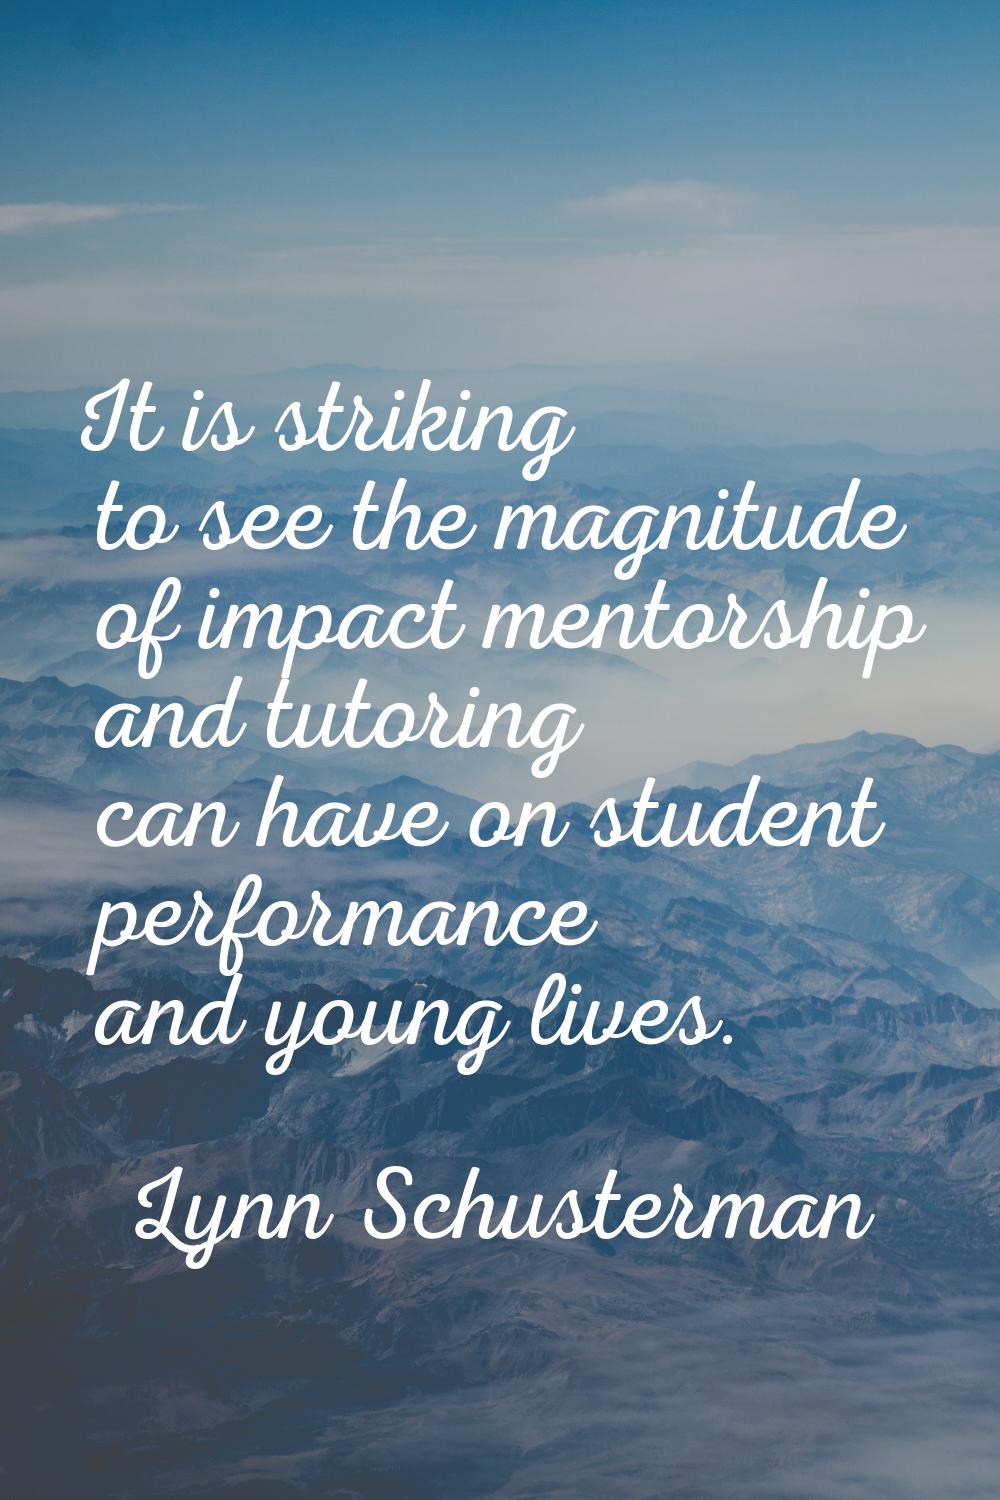 It is striking to see the magnitude of impact mentorship and tutoring can have on student performan